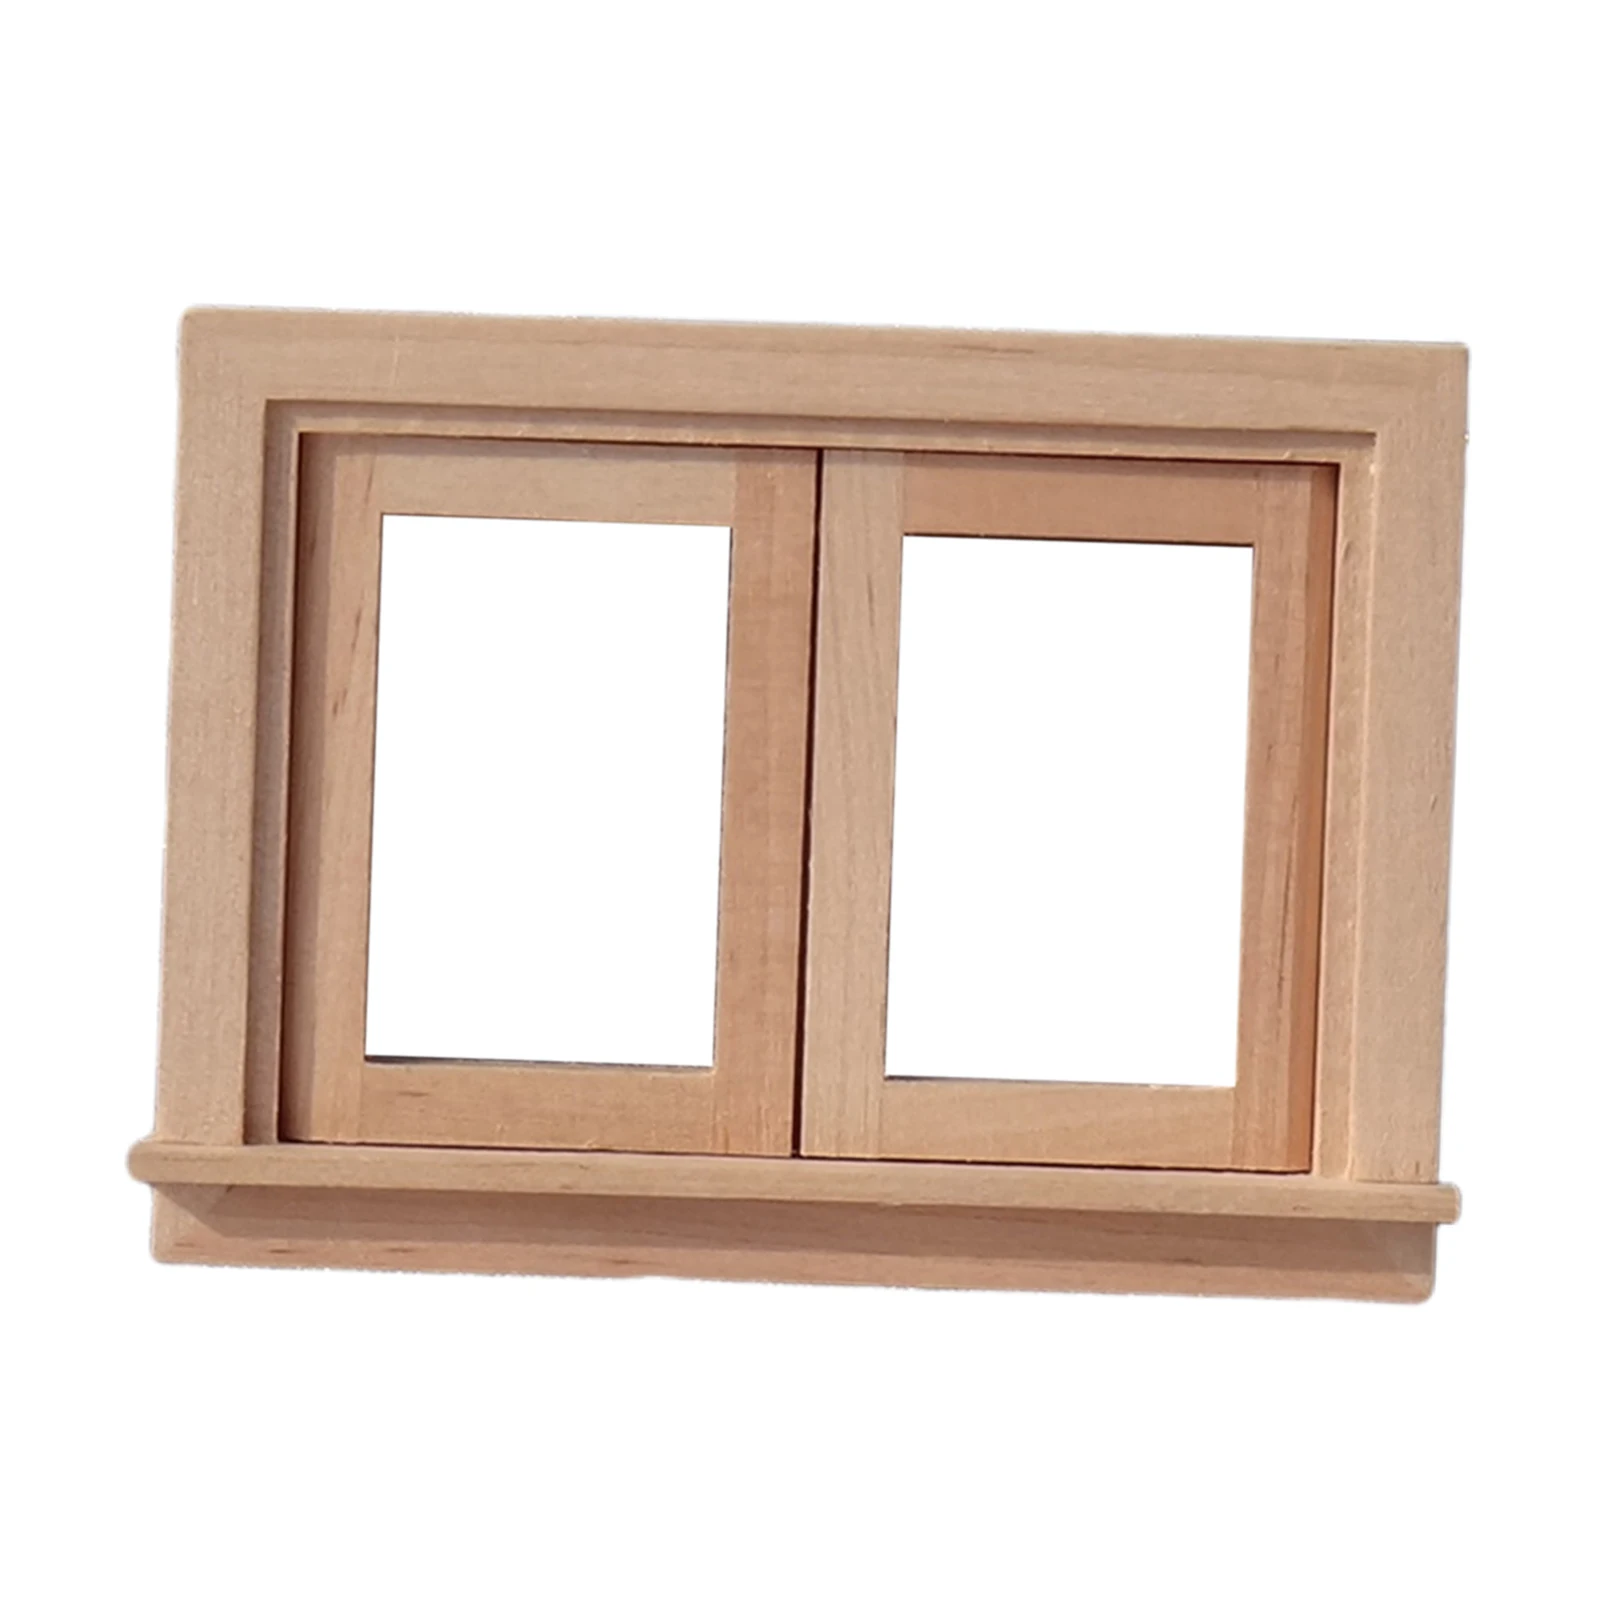 1/12 Dollhouse Miniature Wood Window with Two Panes Building Kit Life Scene DIY Accessories Pretend Toys Playset